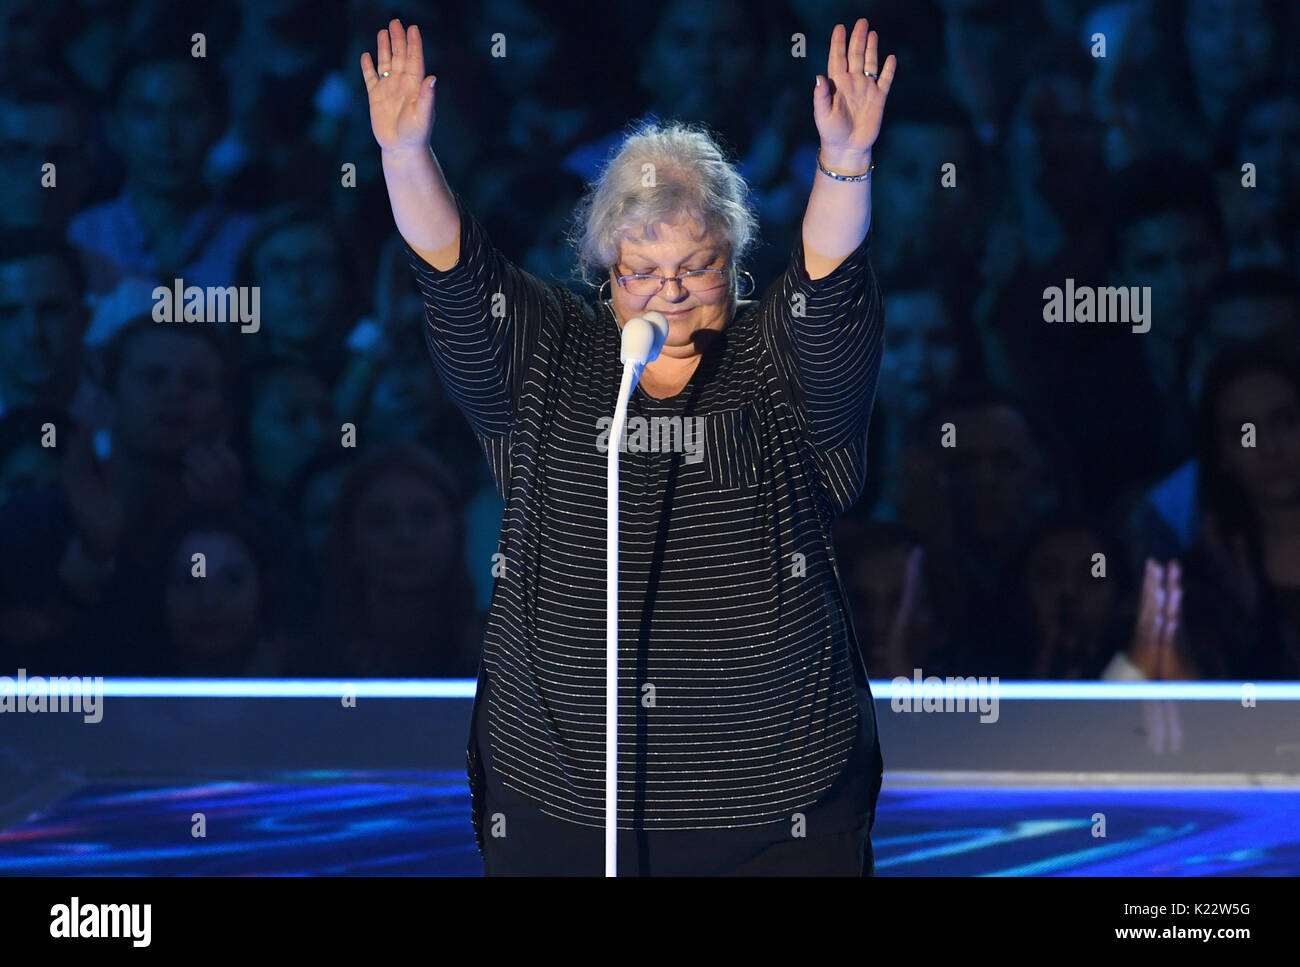 Susan Bro on stage during the 2017 MTV Video Music Awards held at The Forum in Los Angeles, USA. PRESS ASSOCIATION Photo. Picture date: Sunday August 27, 2017. See PA Story SHOWBIZ VMAs. Photo credit should read: PA/PA Wire Stock Photo